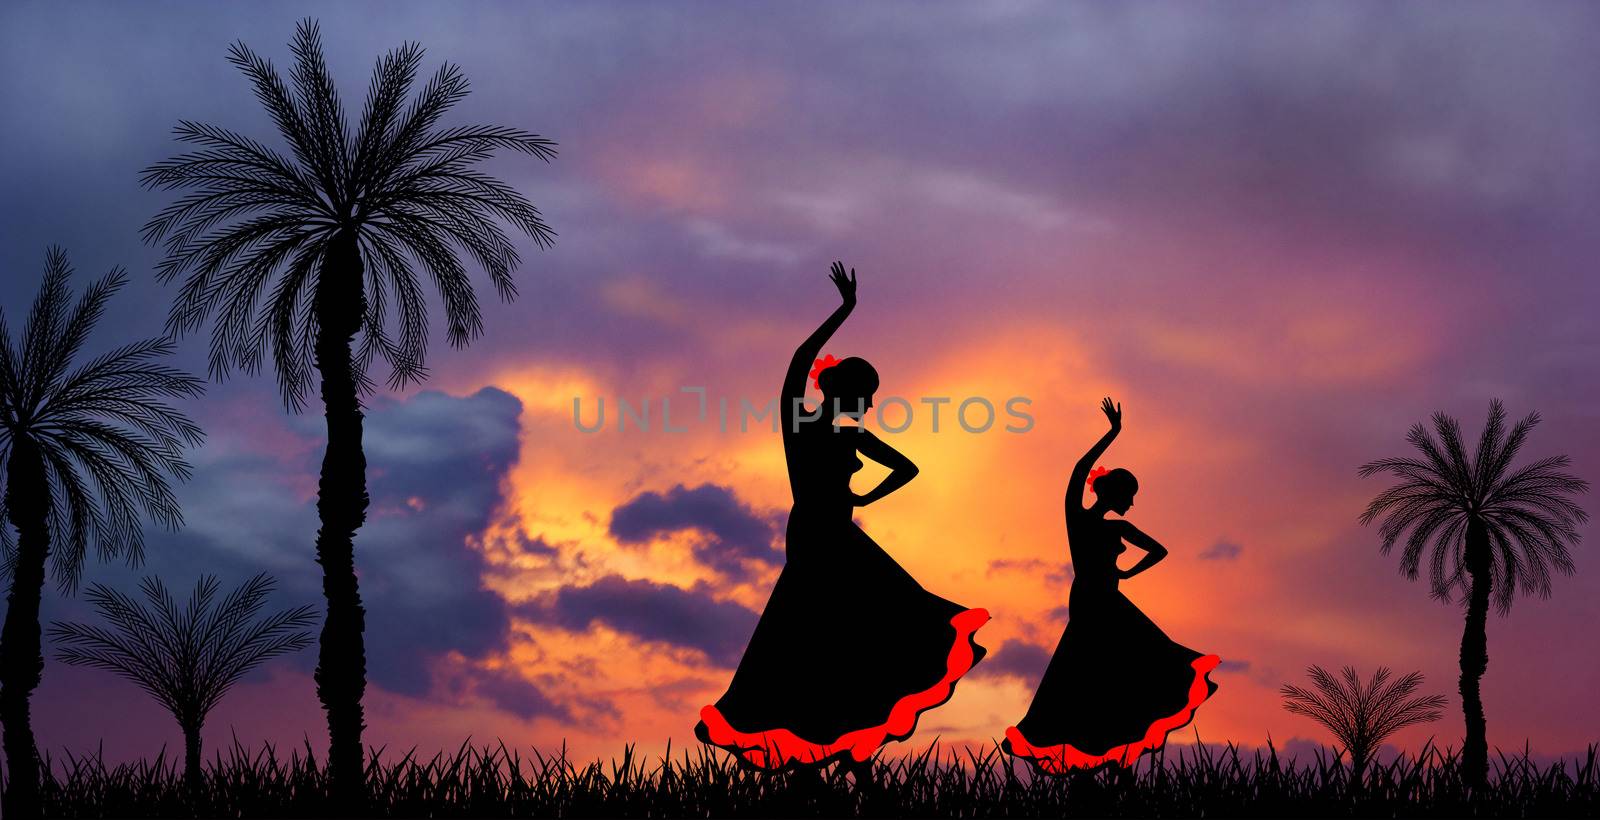 Two girls are dancing flamenco. Silhouettes of girls dancing flamenco. Sunset shines before a thunderstorm.                                                                                                                                                                               